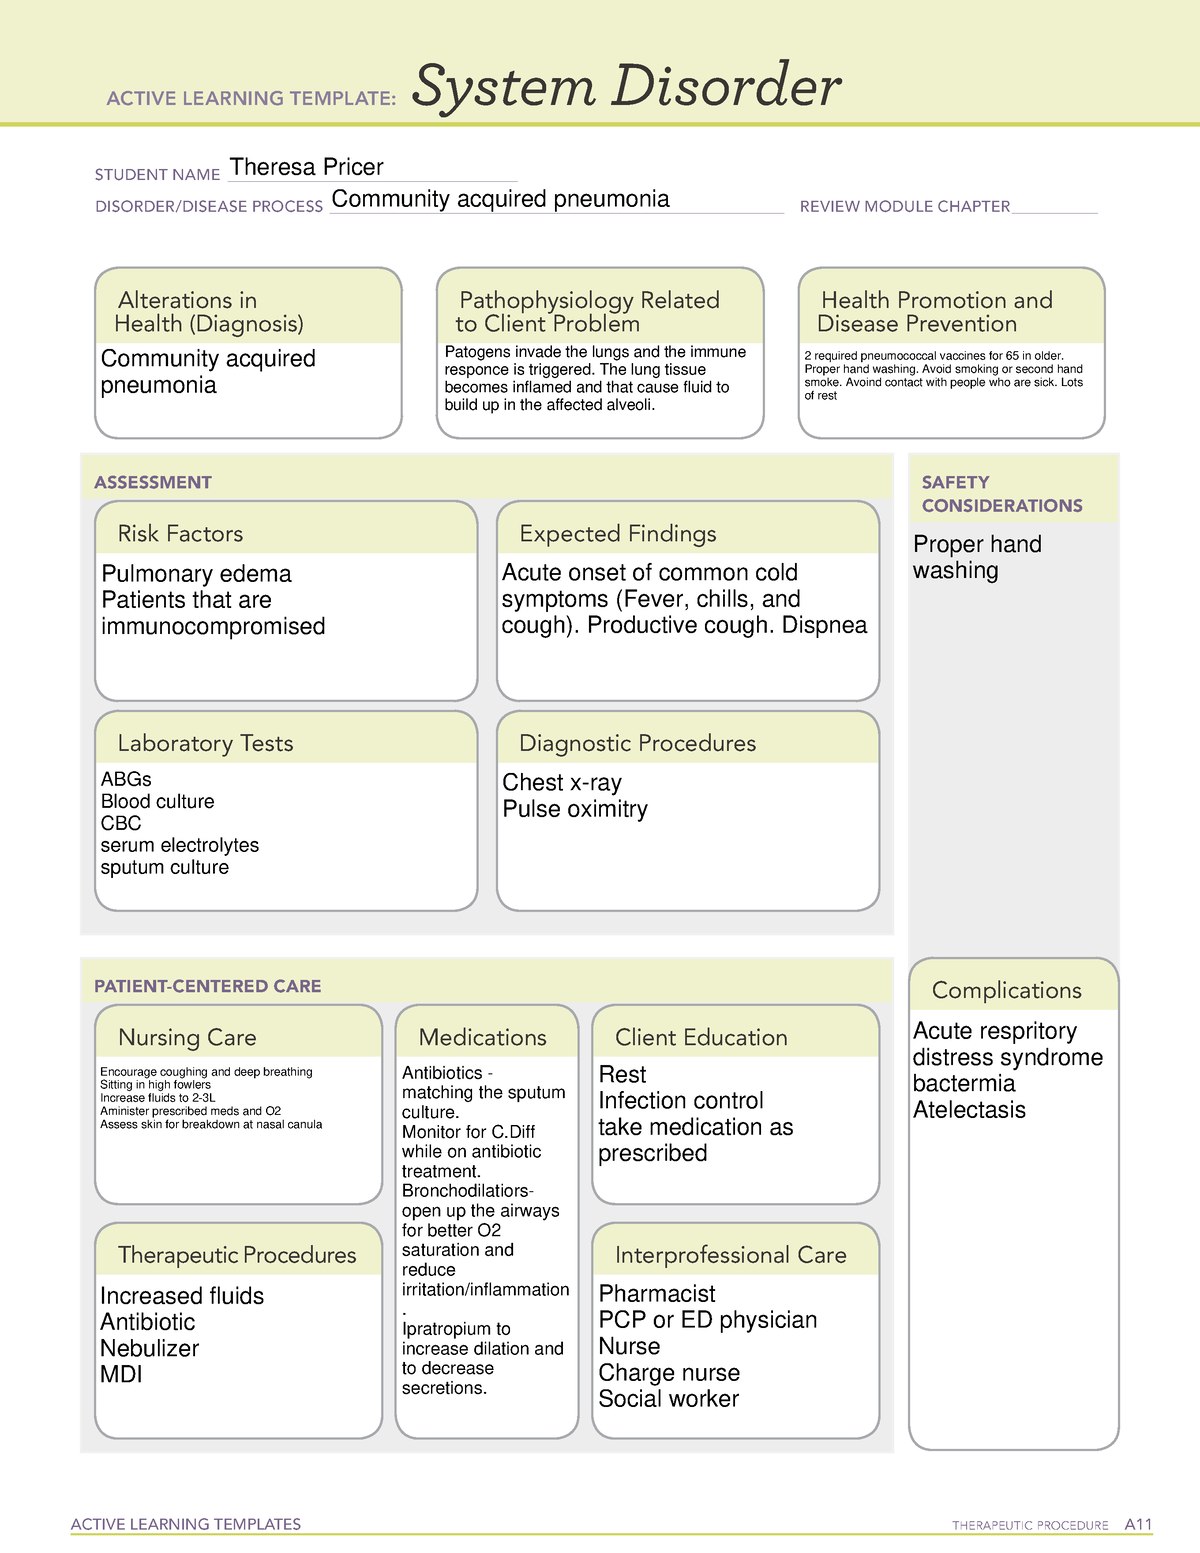 Active Learning Template sys Dis Community Acquired Pneumonia ACTIVE